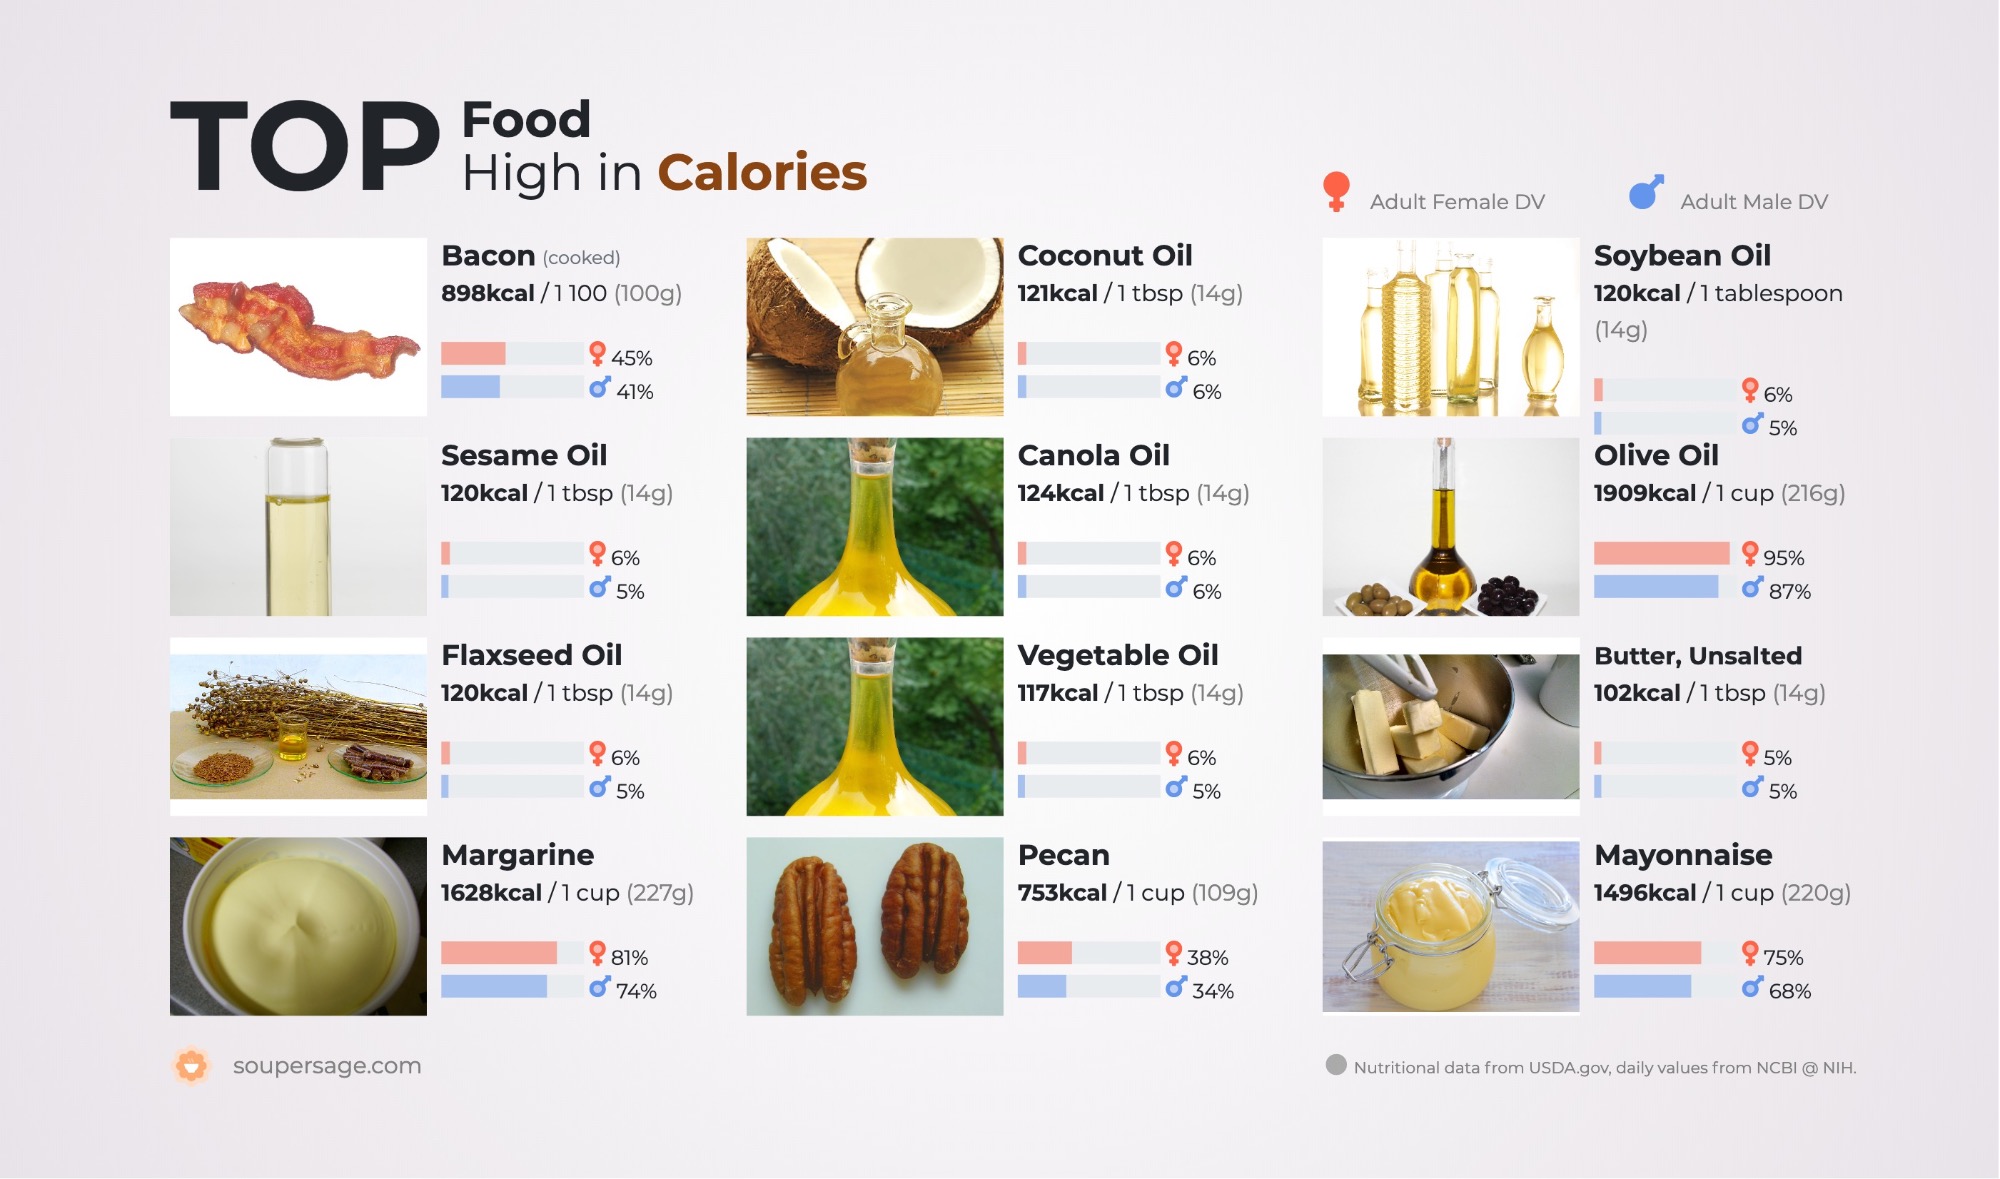 image of Top Food High in Calories